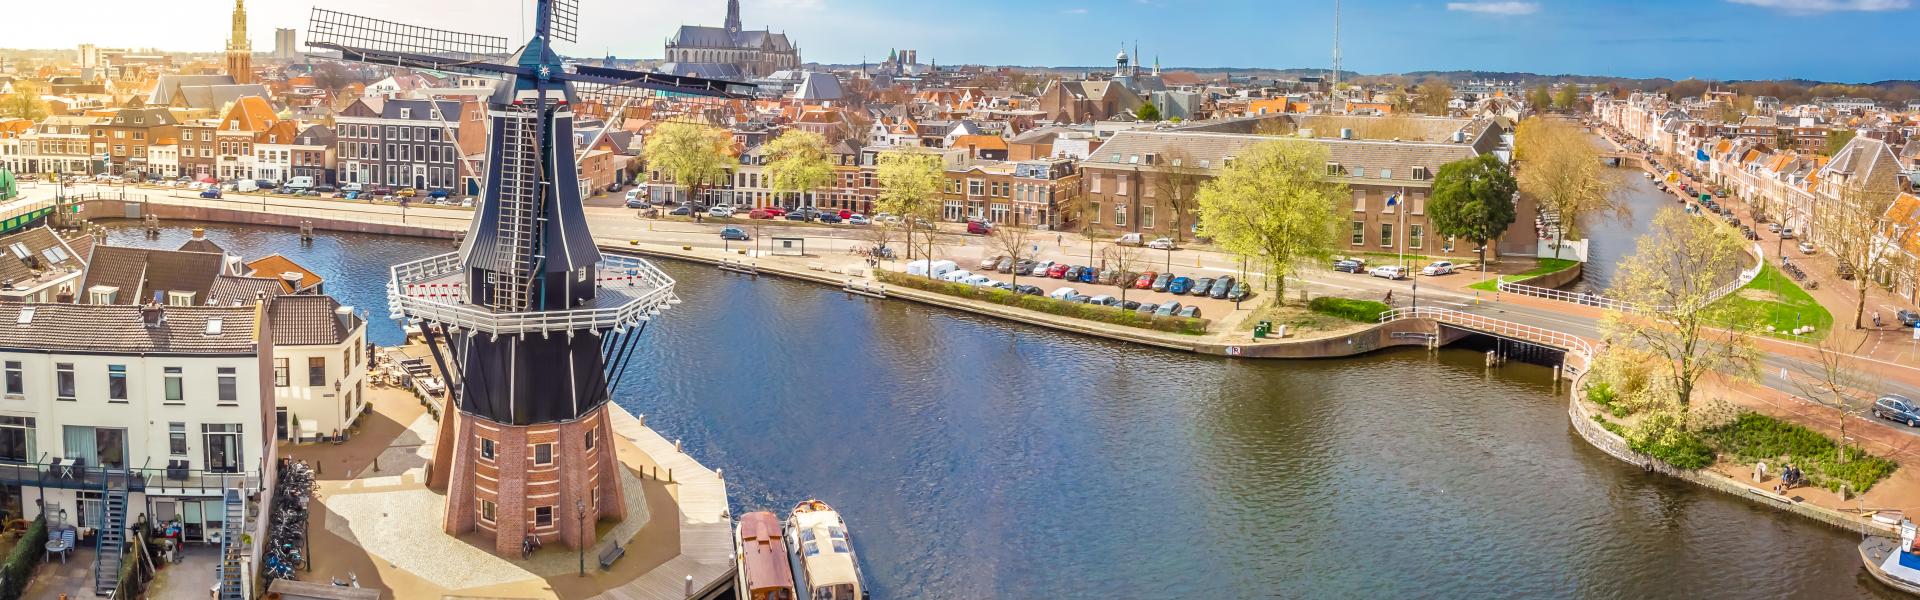 Find the perfect vacation home Haarlem - Casamundo